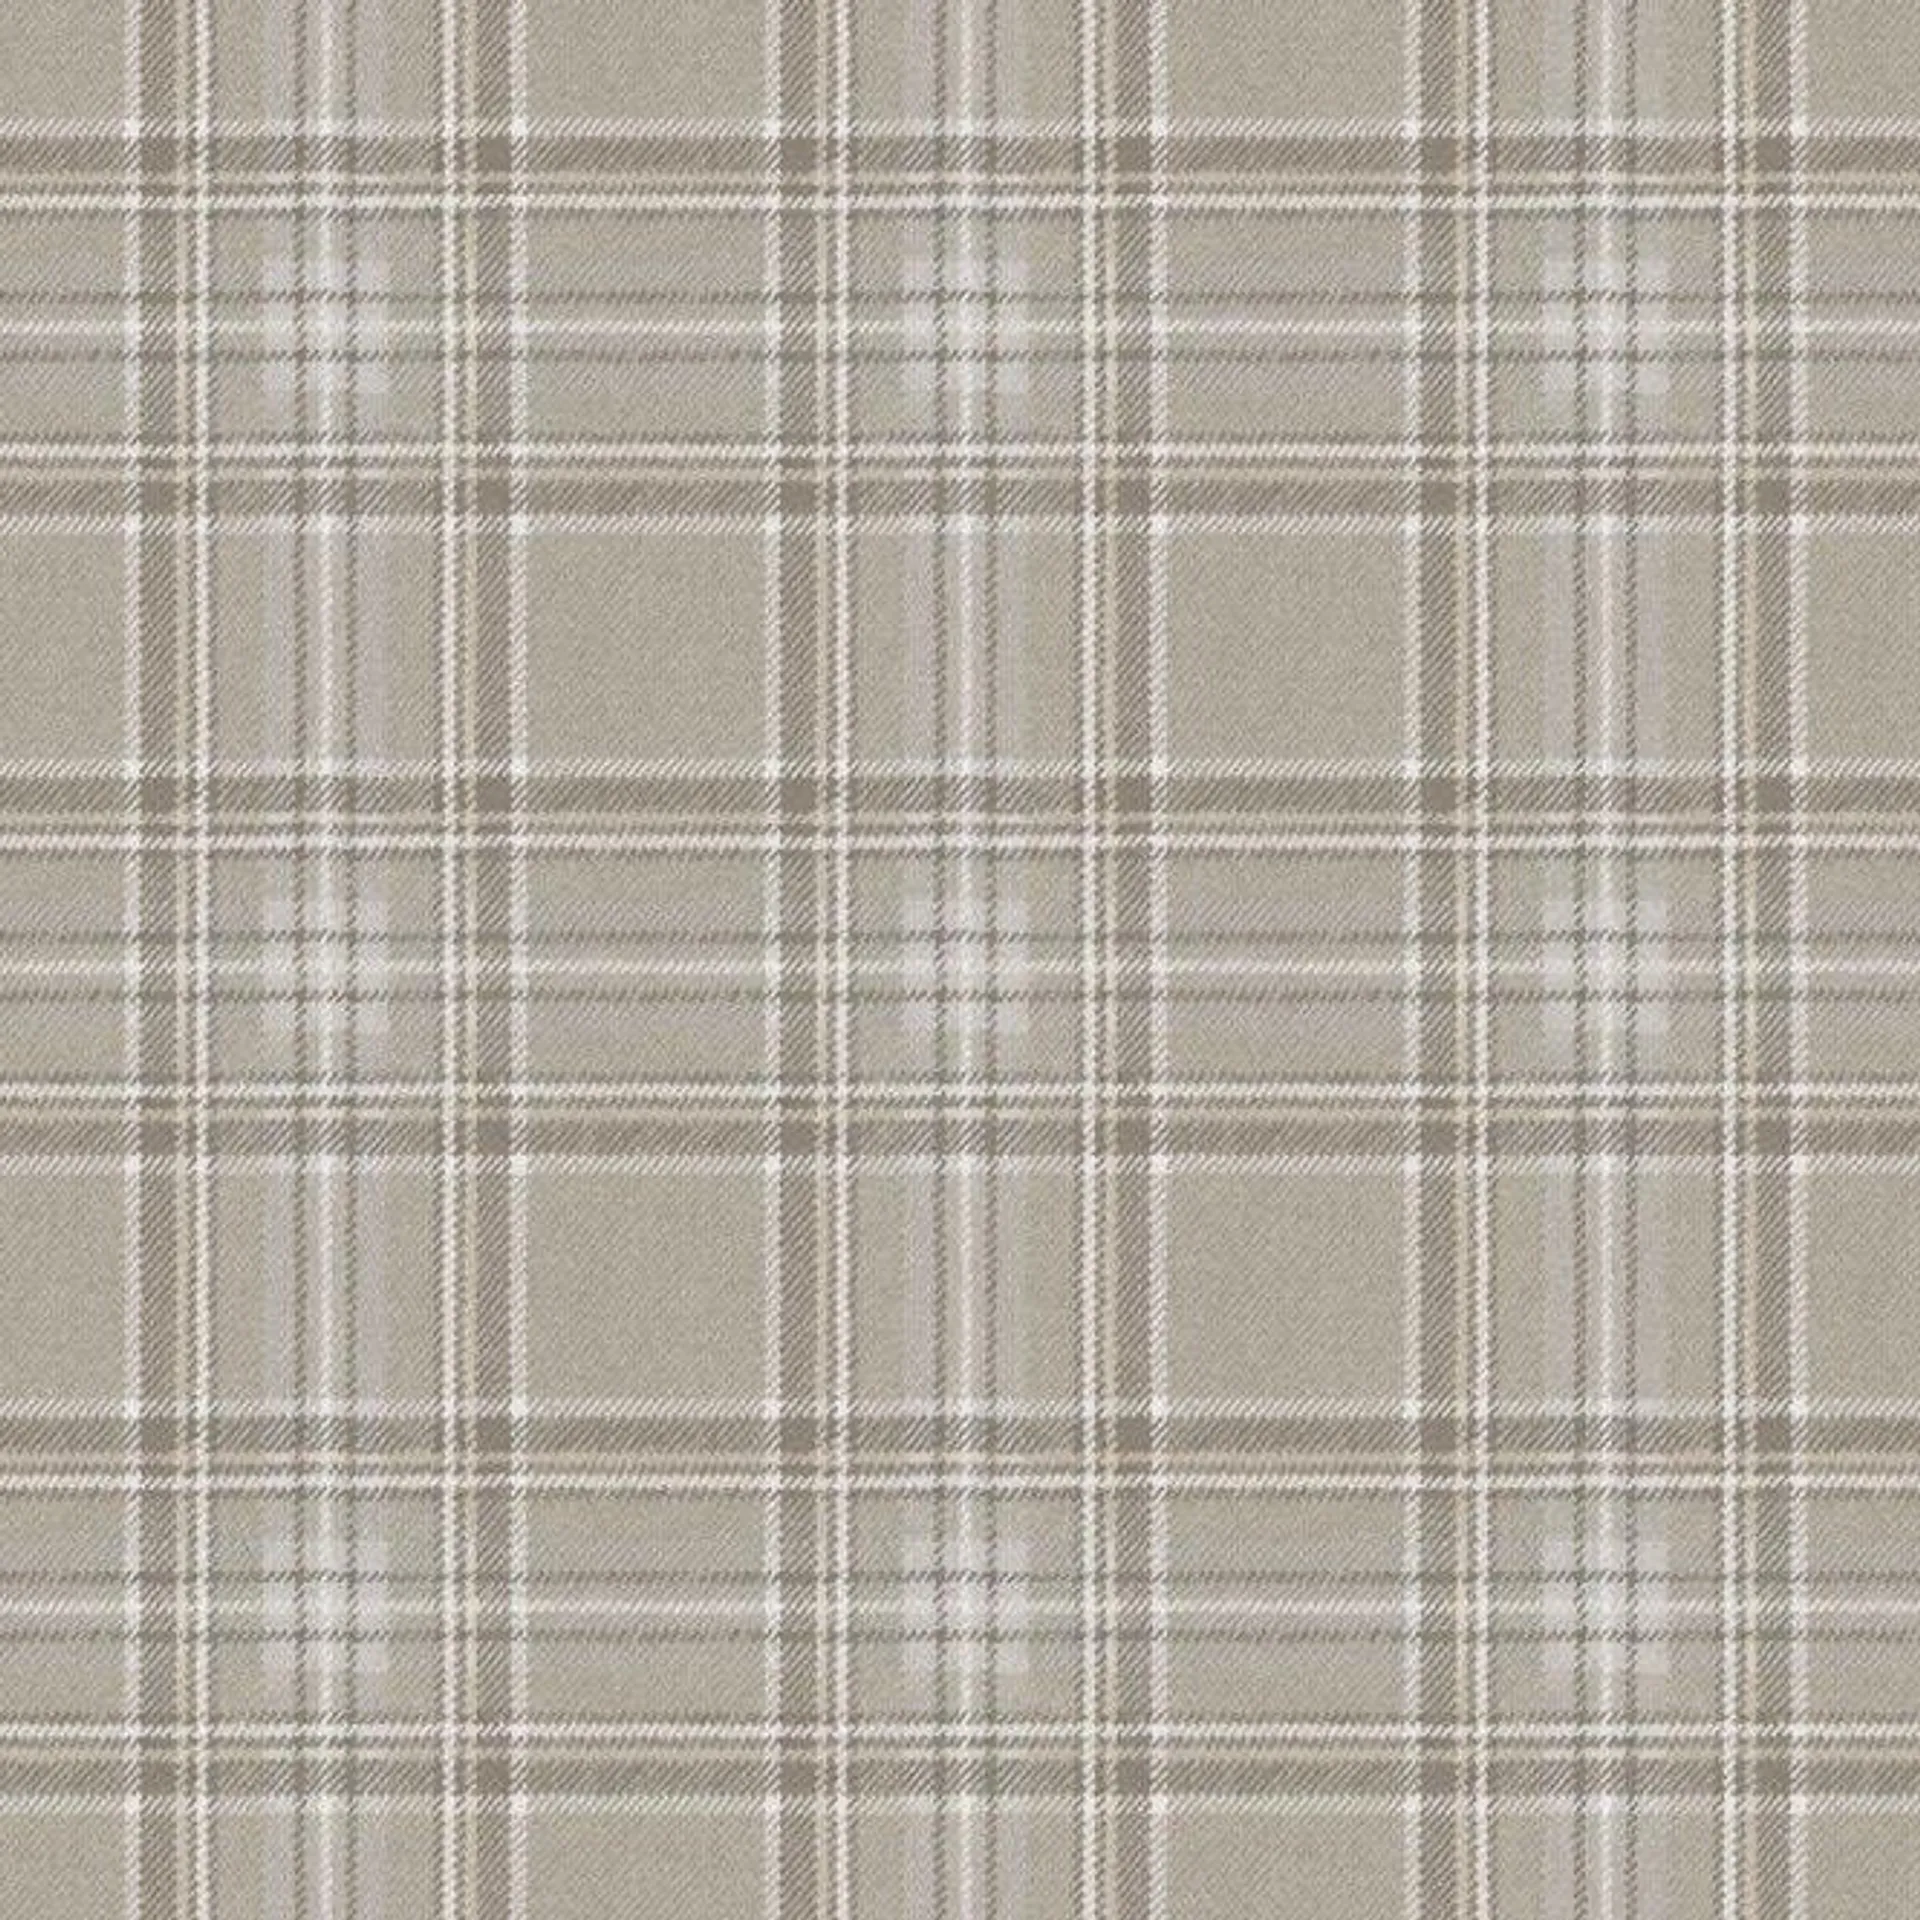 Classic Check wallpaper in taupe